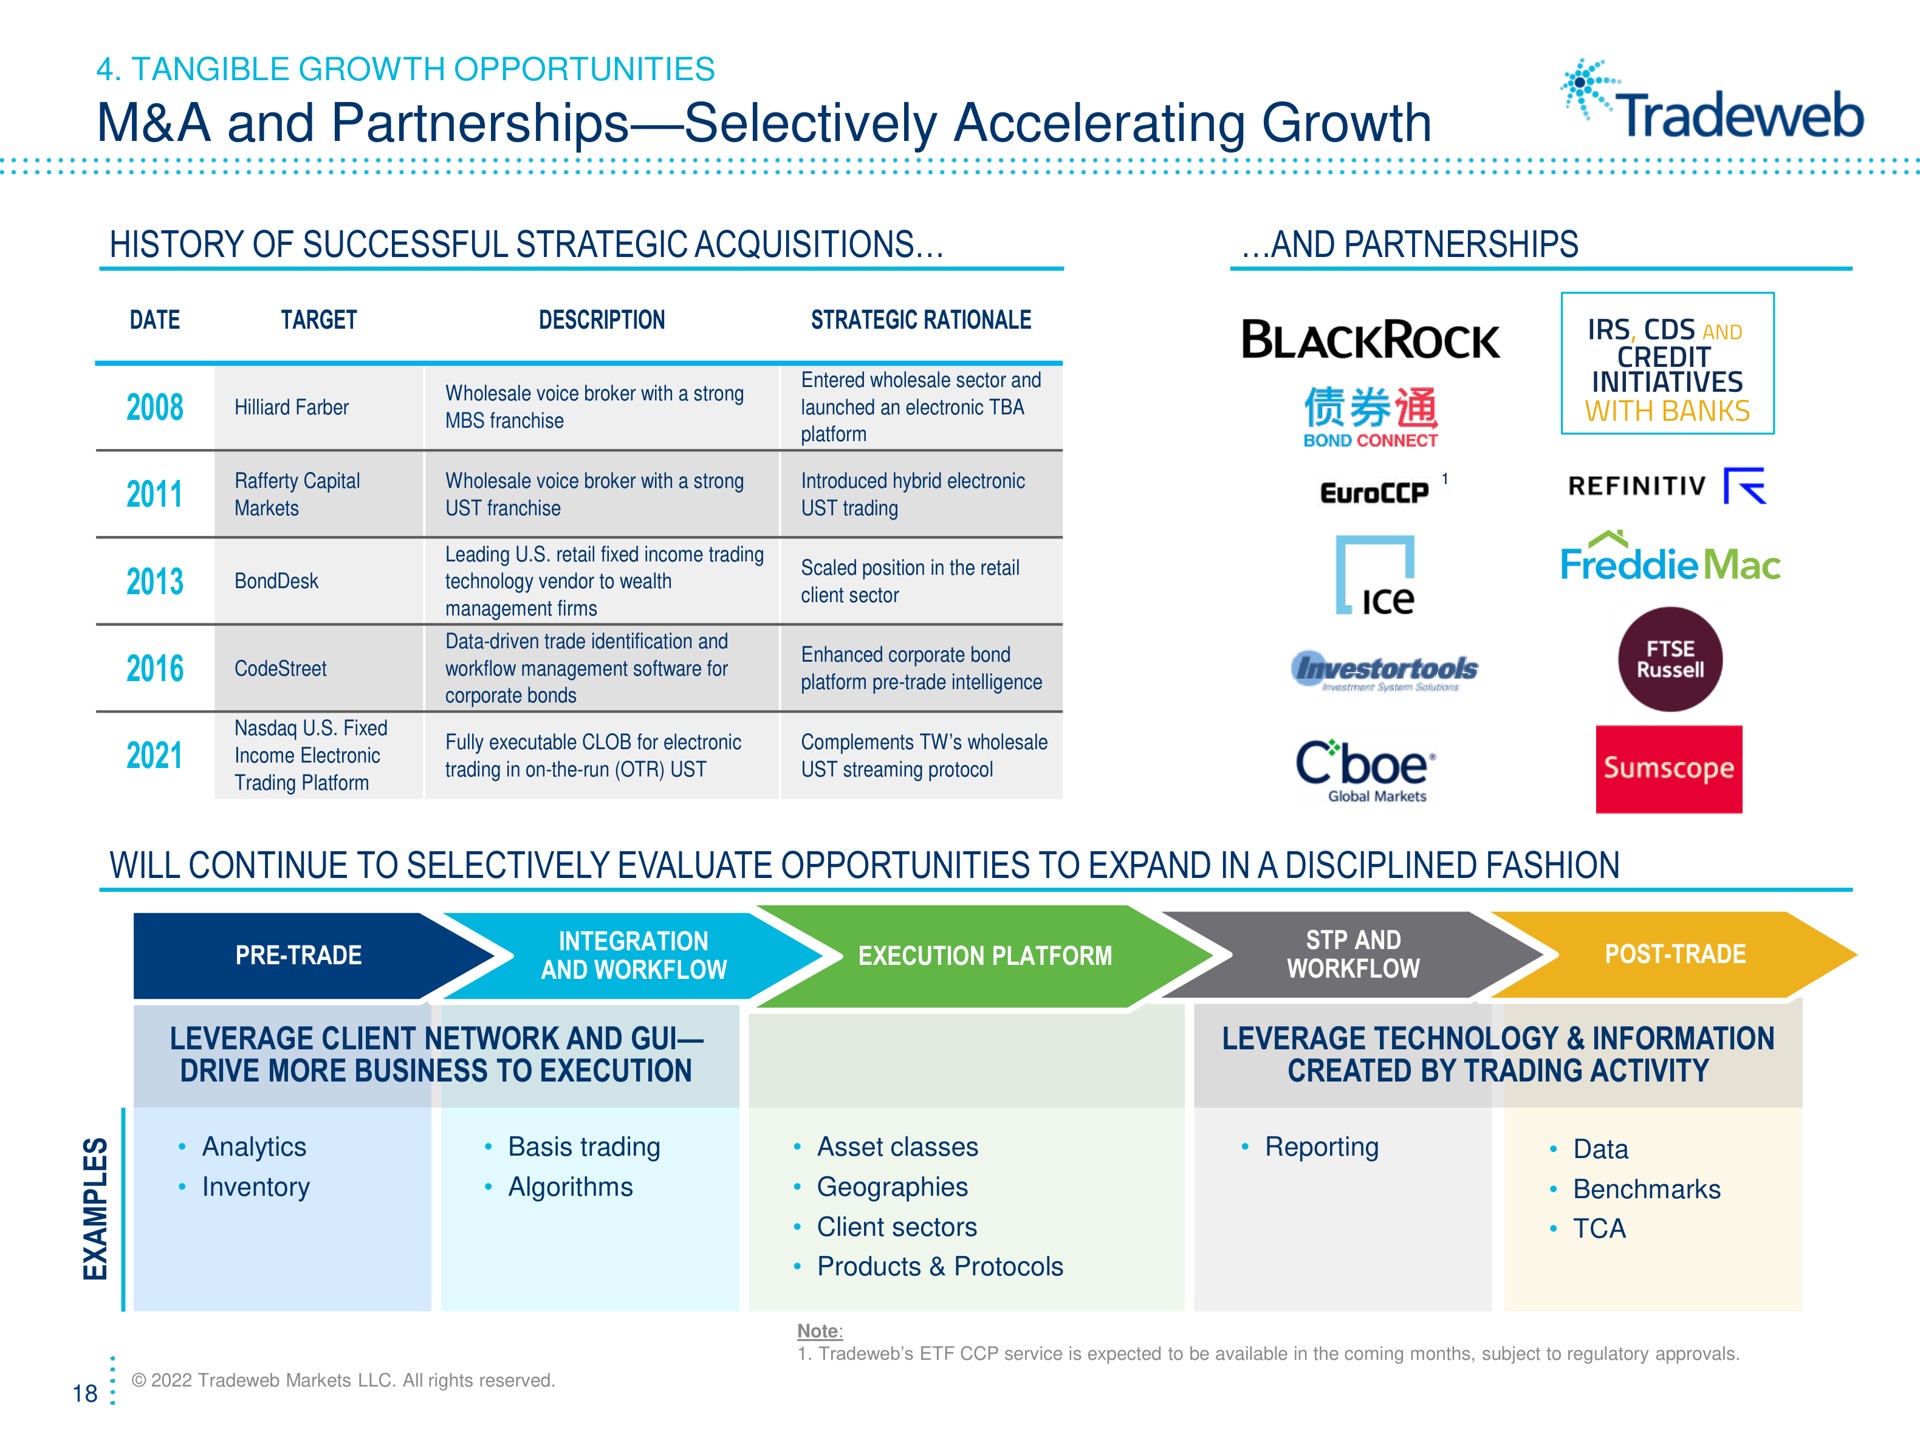 a and partnerships selectively accelerating growth history of successful strategic acquisitions and partnerships will continue to selectively evaluate opportunities to expand in a disciplined fashion tangible rationale franchise entered wholesale sector technology vendor wealth management for income electronic initiatives mac ice trade integration execution platform leverage client network drive more business execution leverage technology information created by trading activity | Tradeweb